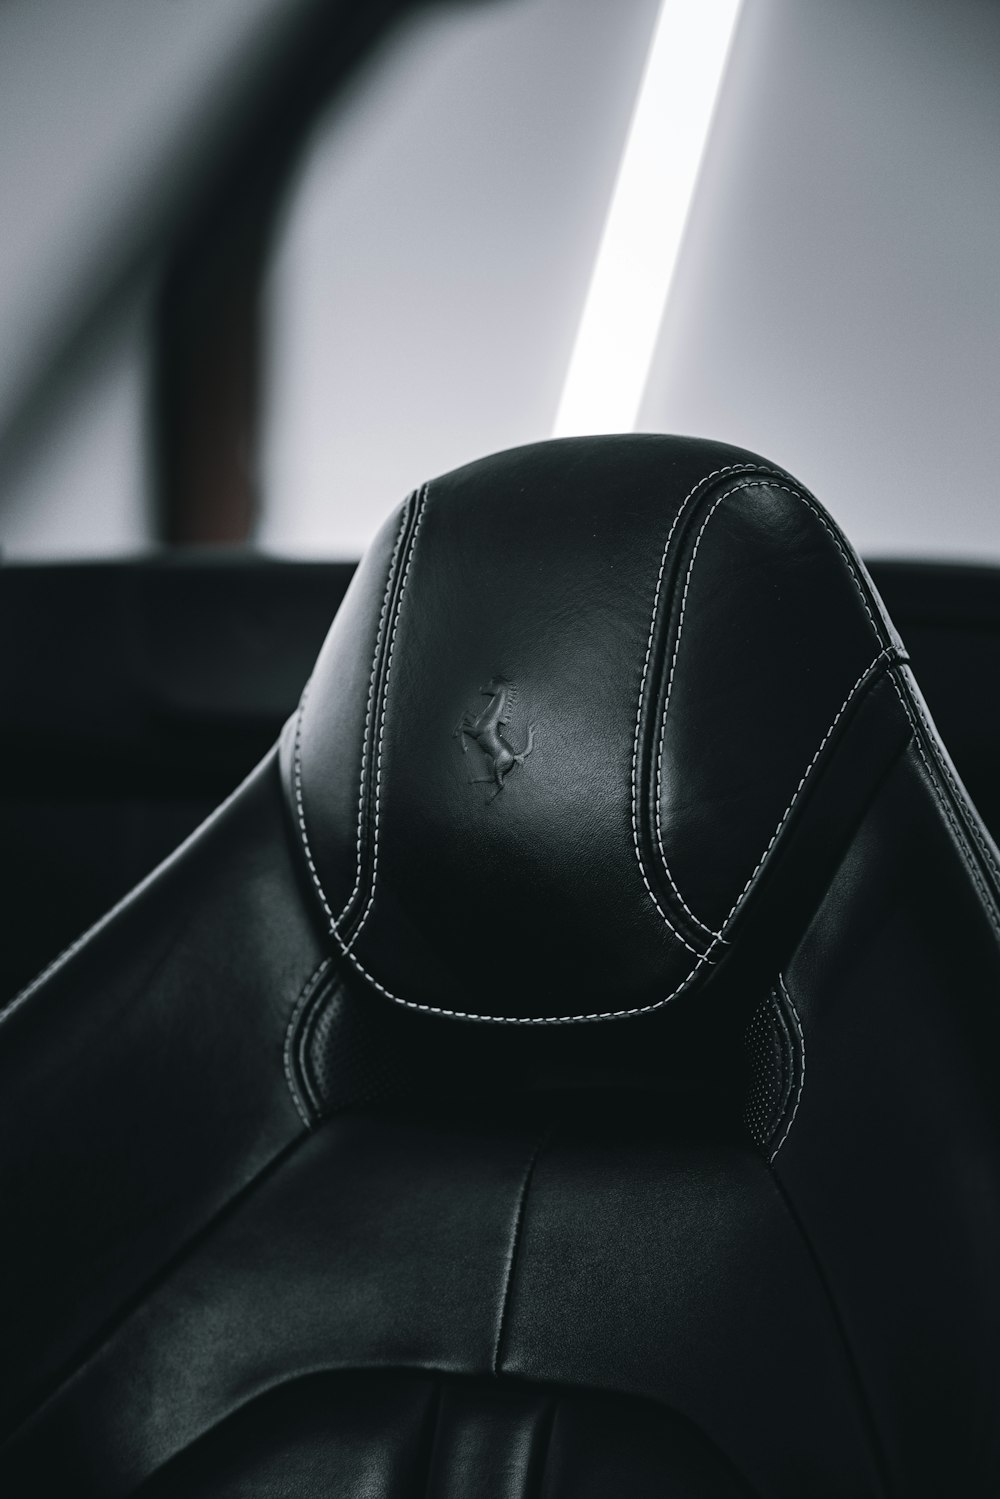 a close up of a black leather seat in a car